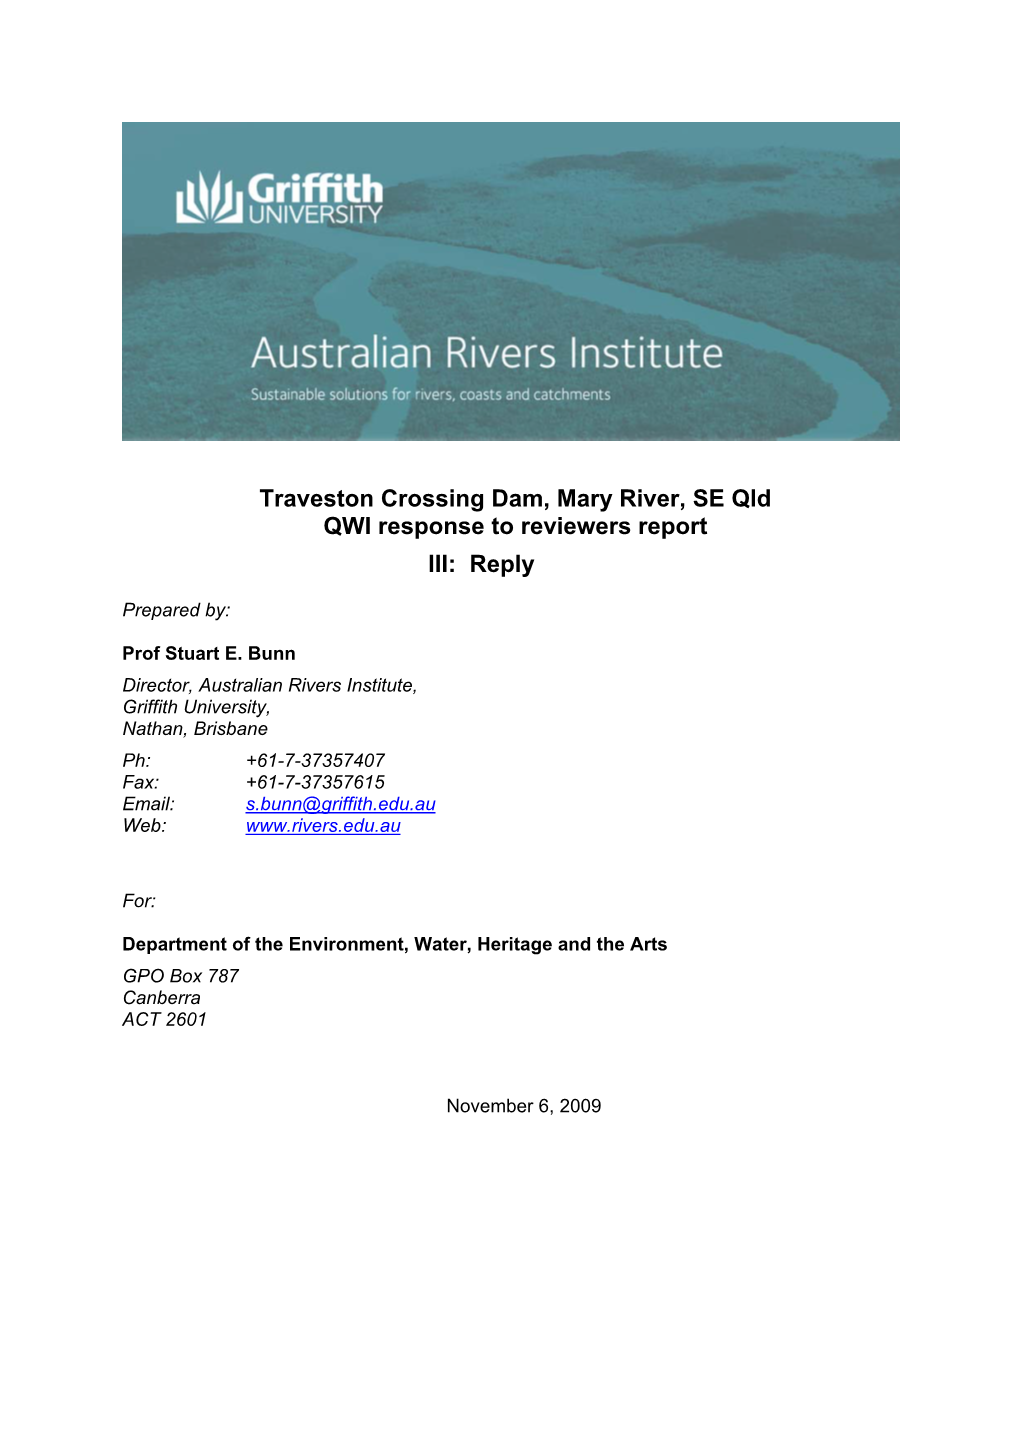 Traveston Crossing Dam, Mary River, SE Qld QWI Response to Reviewers Report III: Reply